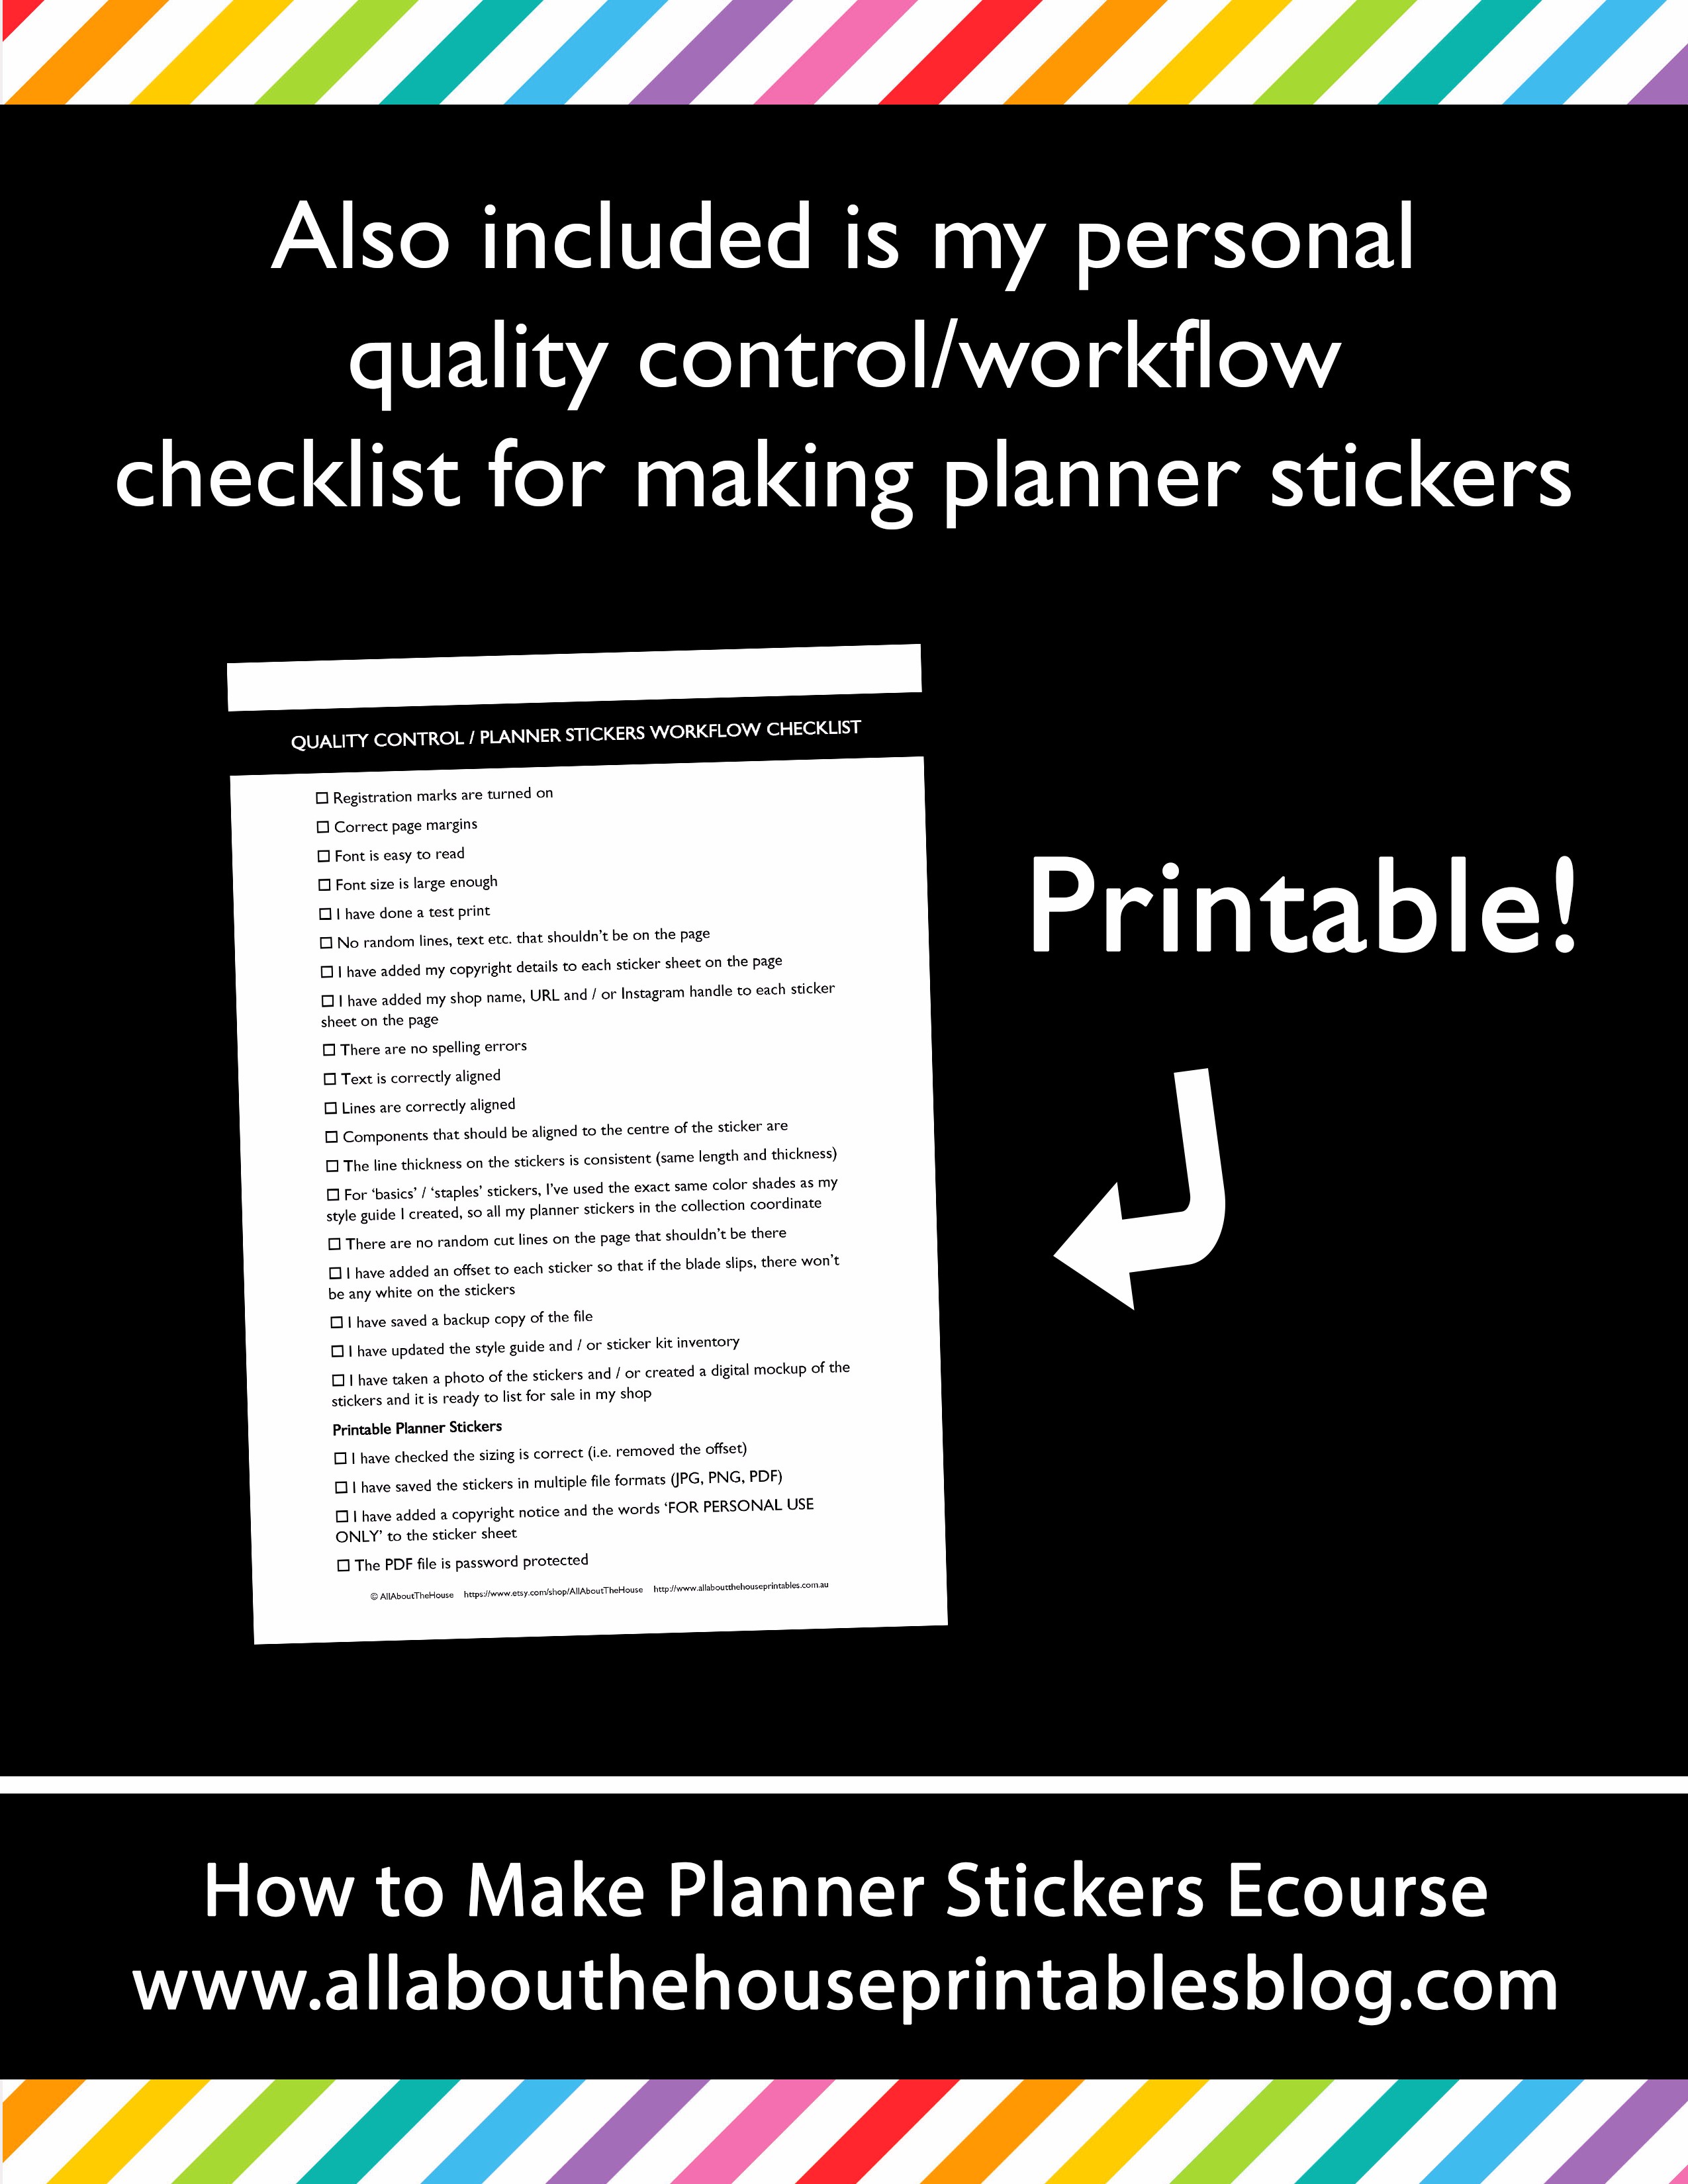 making money selling planner stickers